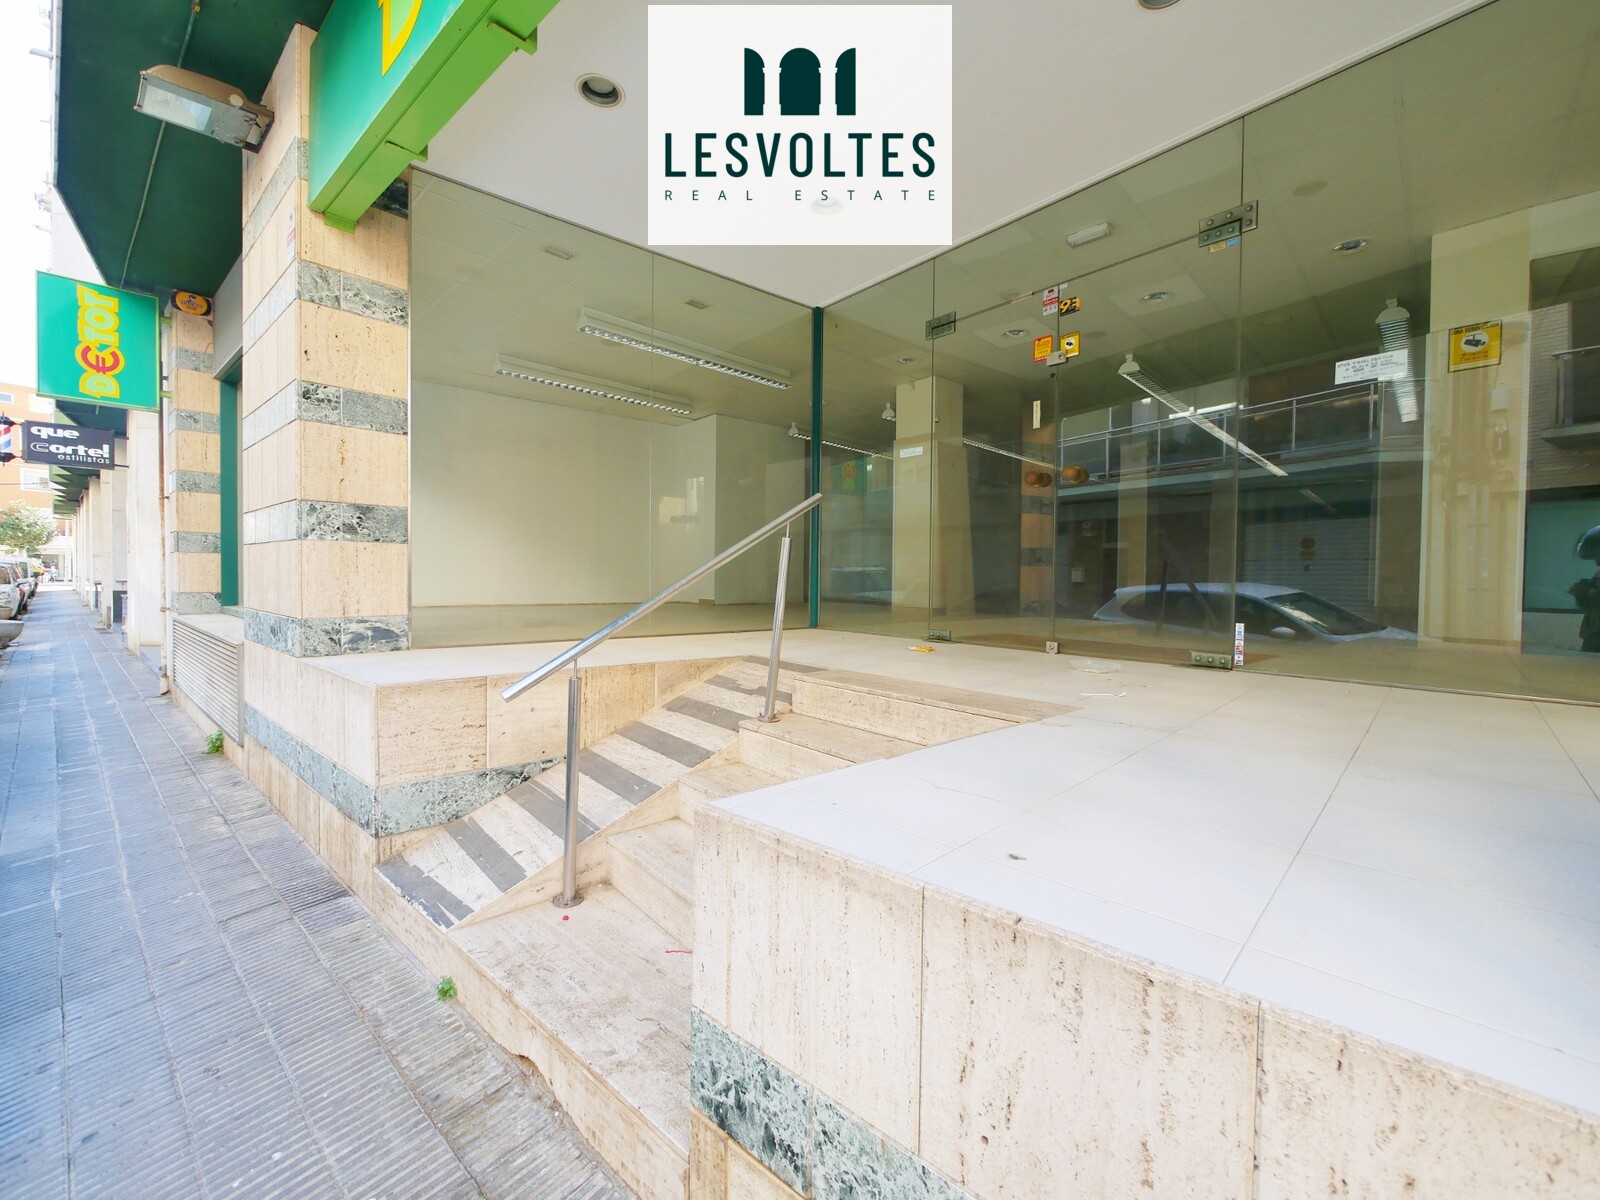 COMMERCIAL LOCAL 167 M2 WITH GREAT SHOWCASE FOR SALE IN PALAMÓS. DOWNTOWN AREA.